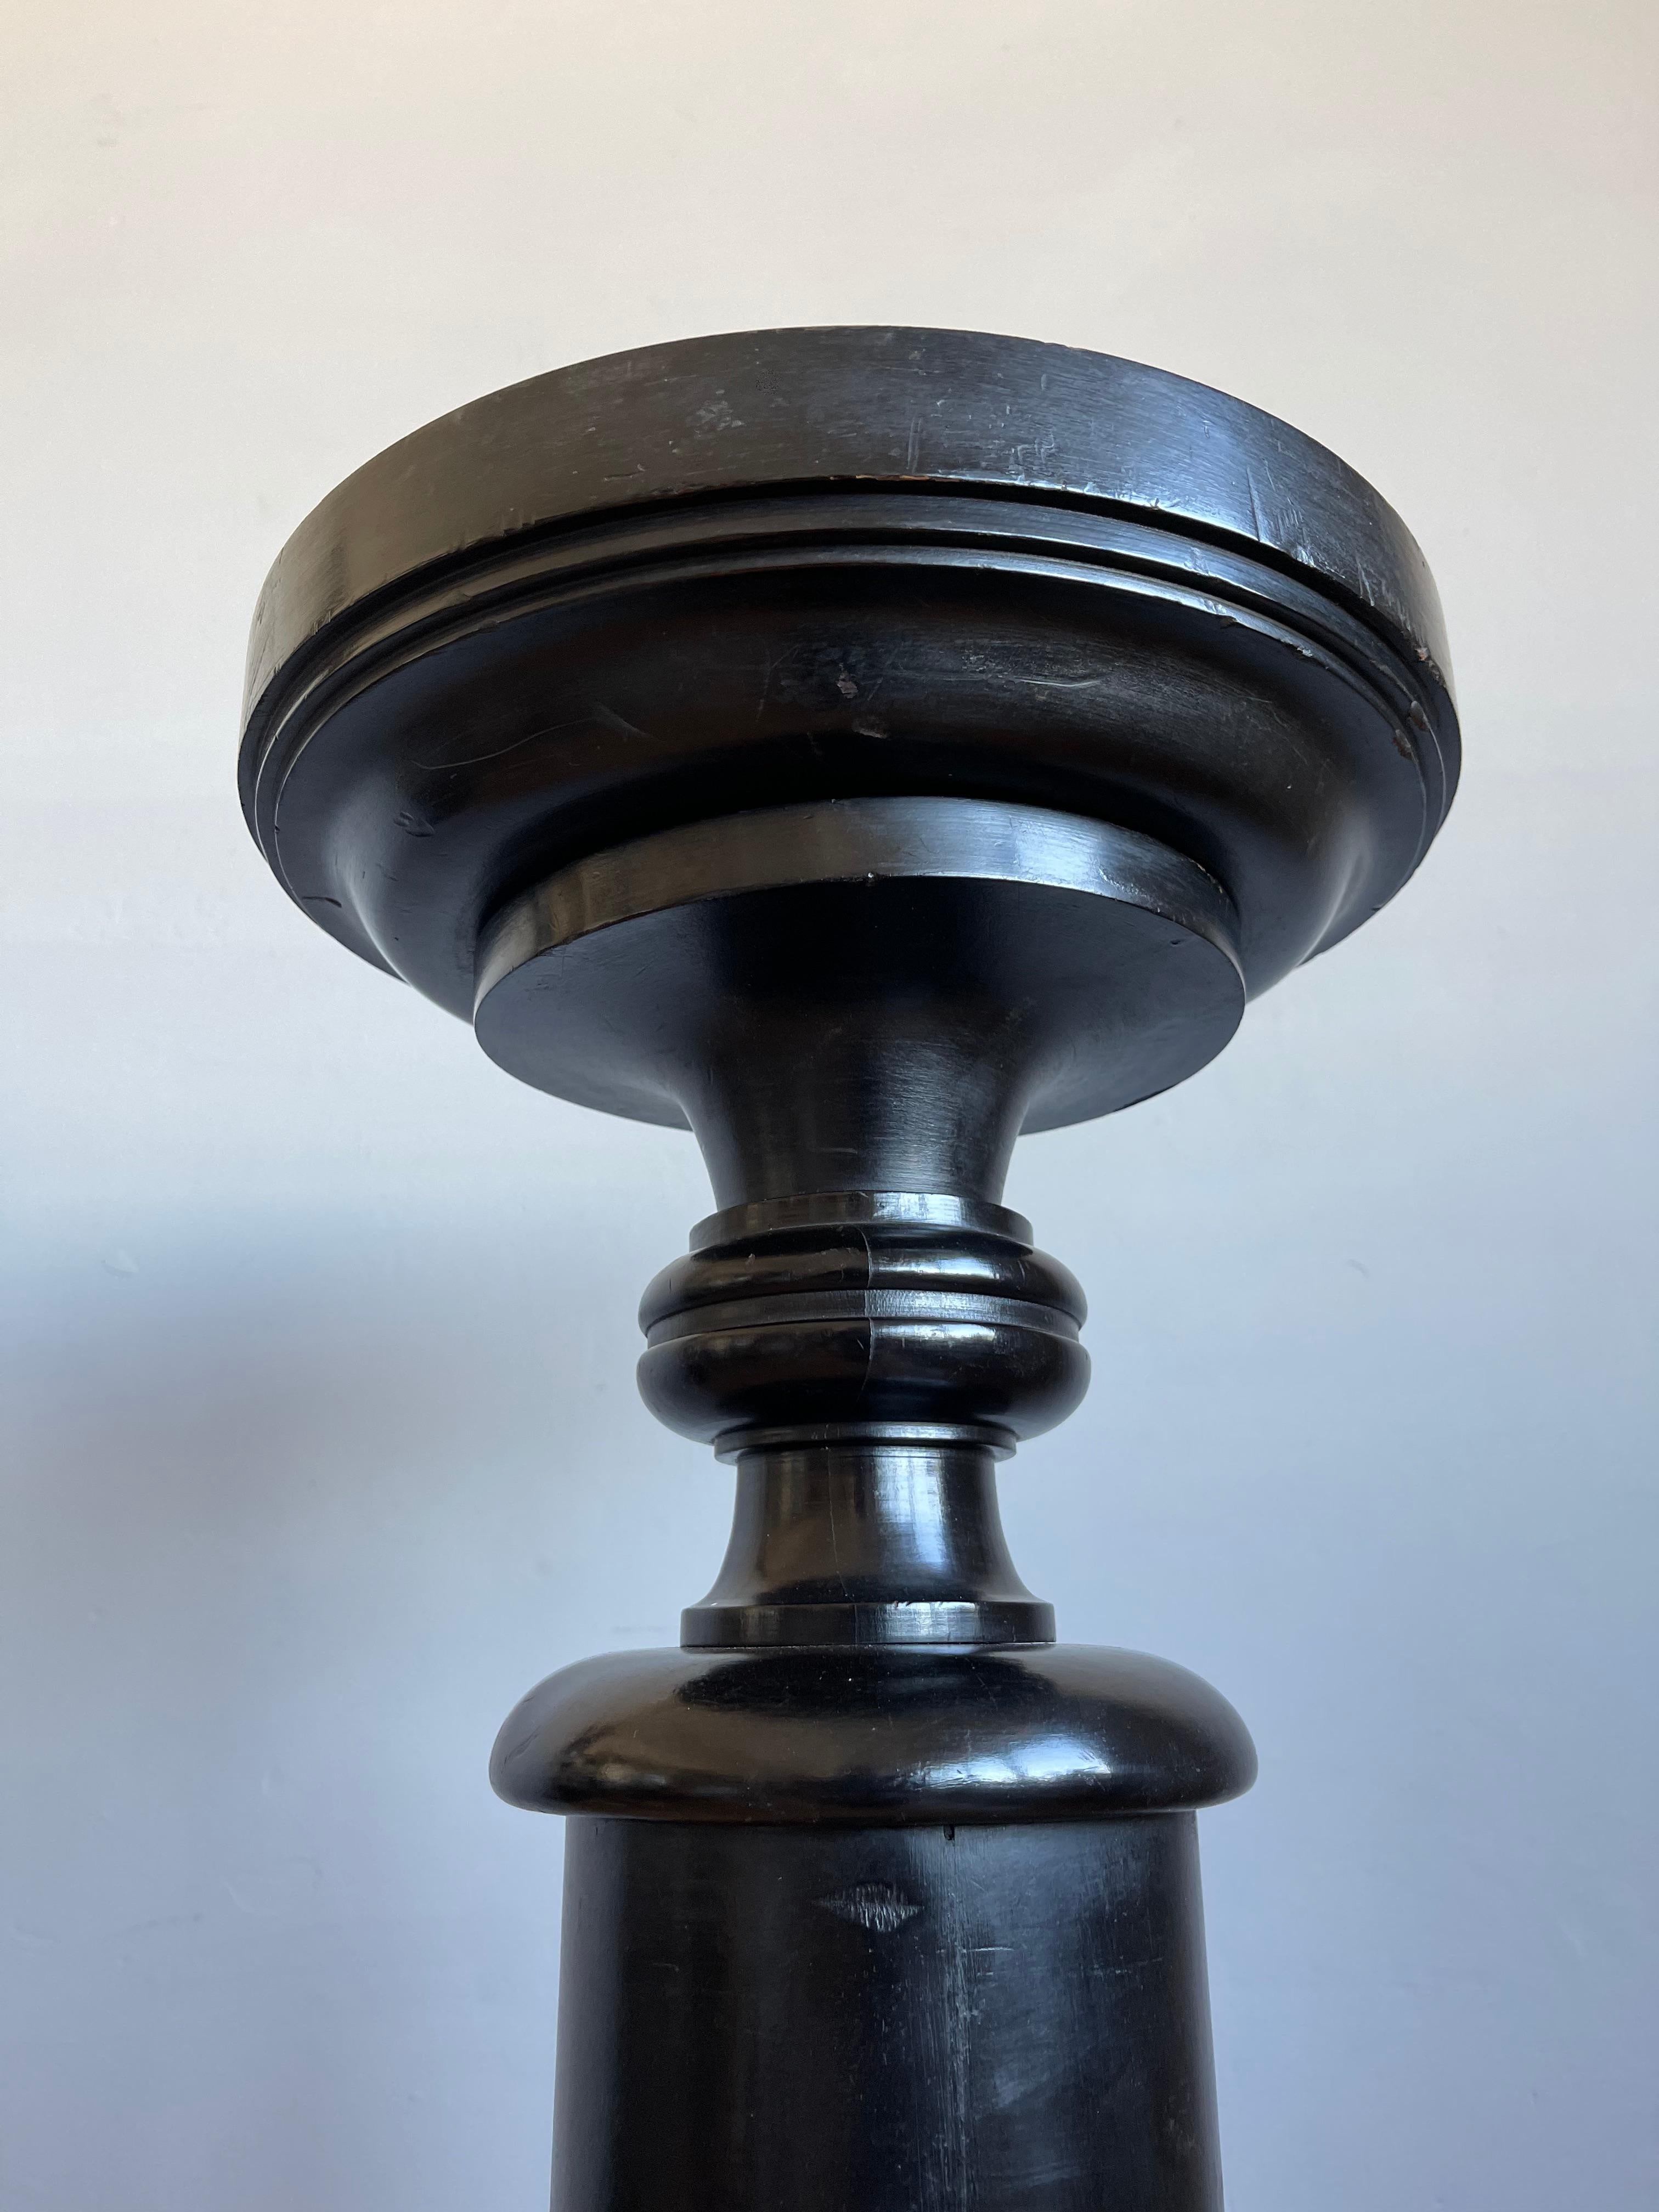 Hand-Carved Stylish and Great Looking Antique, Ebonized Column Flower / Plant Pedestal Stand